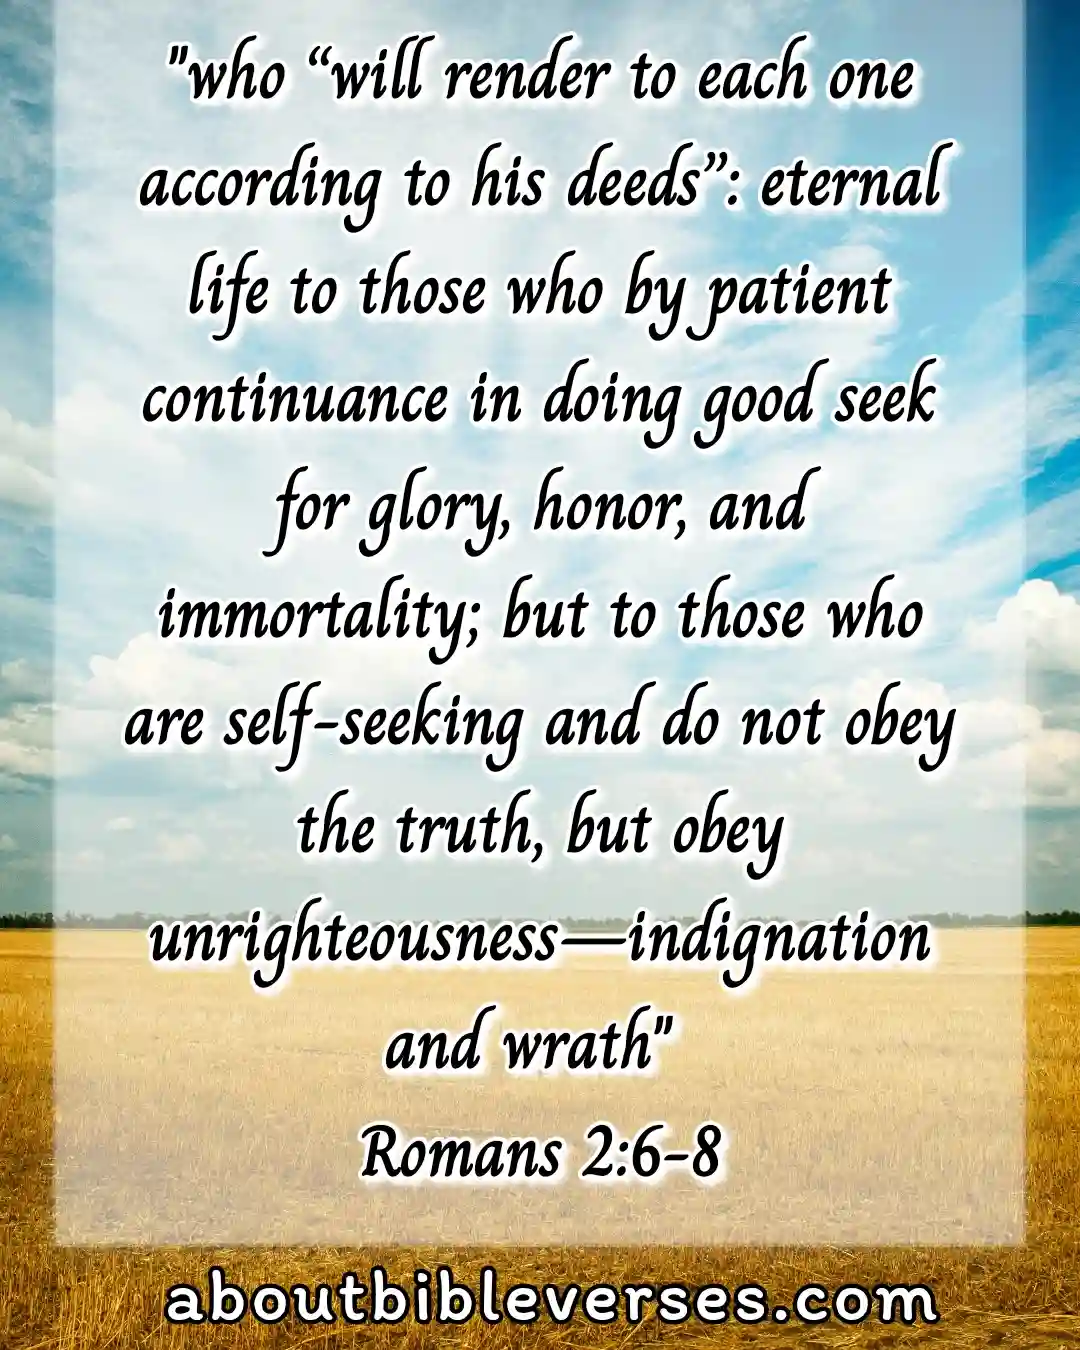 bible verses about for eternal life (Romans 2:6-8)